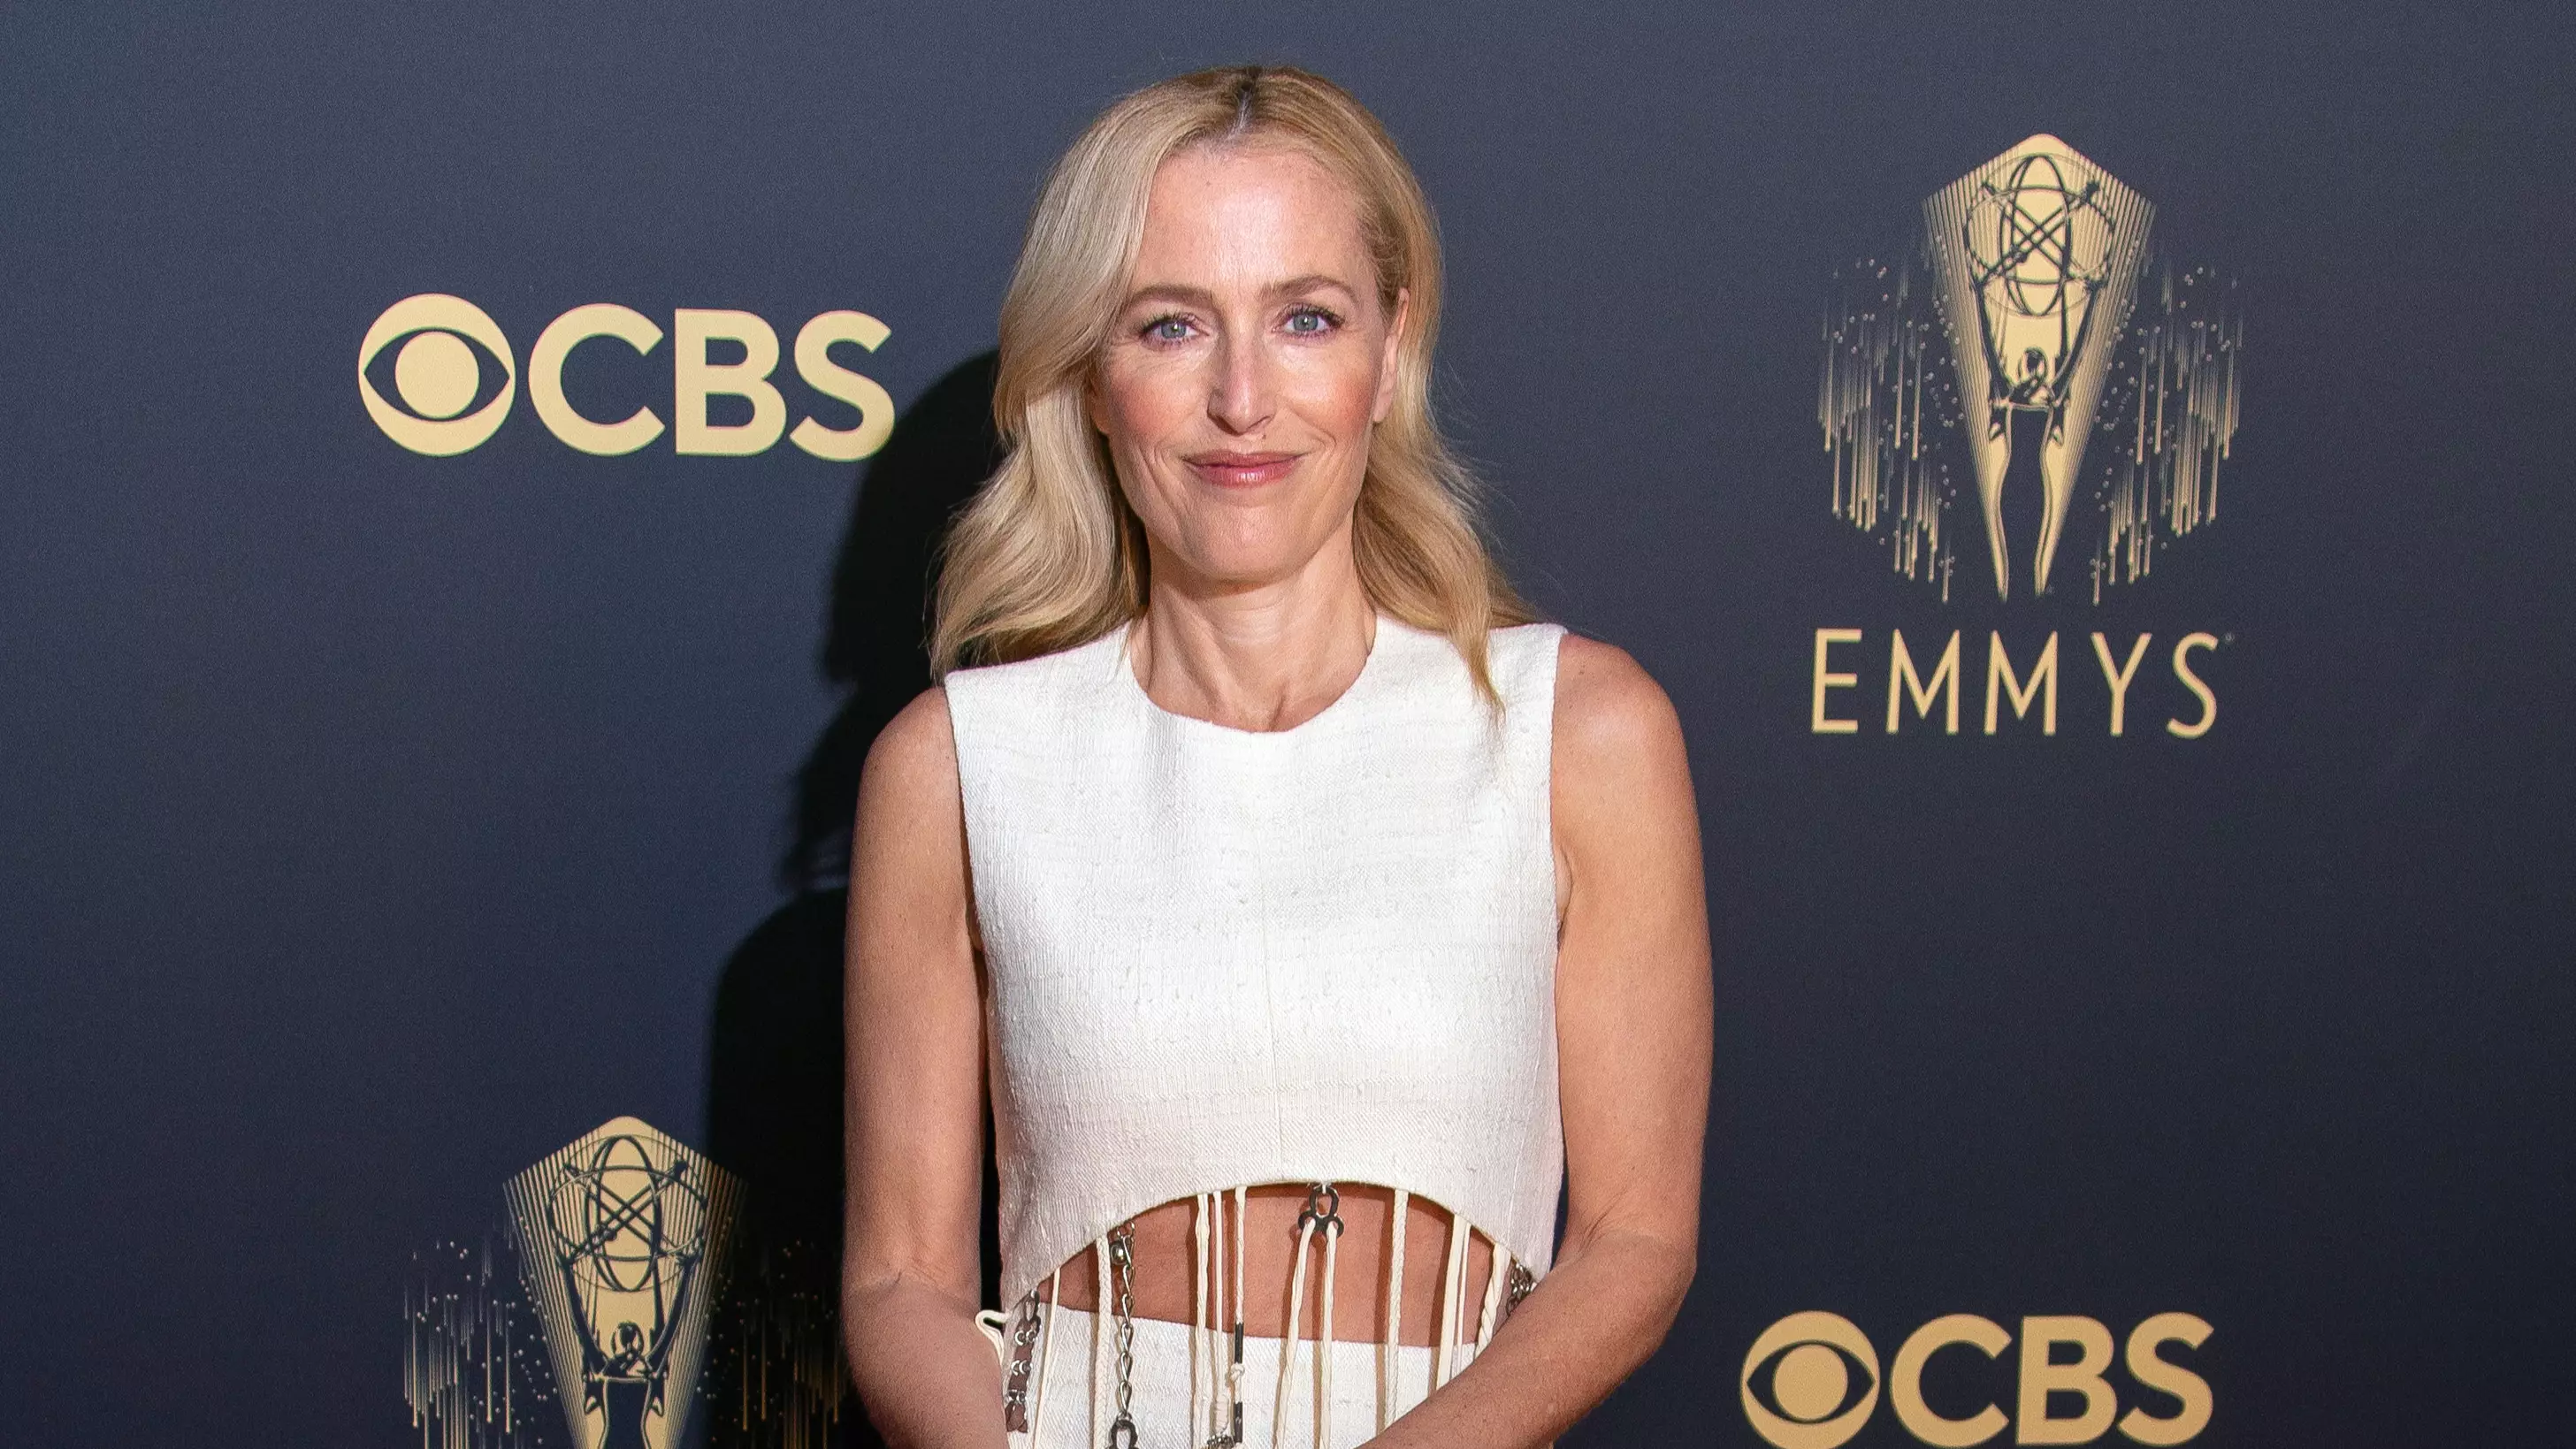 Gillian Anderson's Accent Confuses Viewers As She Accepts Emmy Award For The Crown